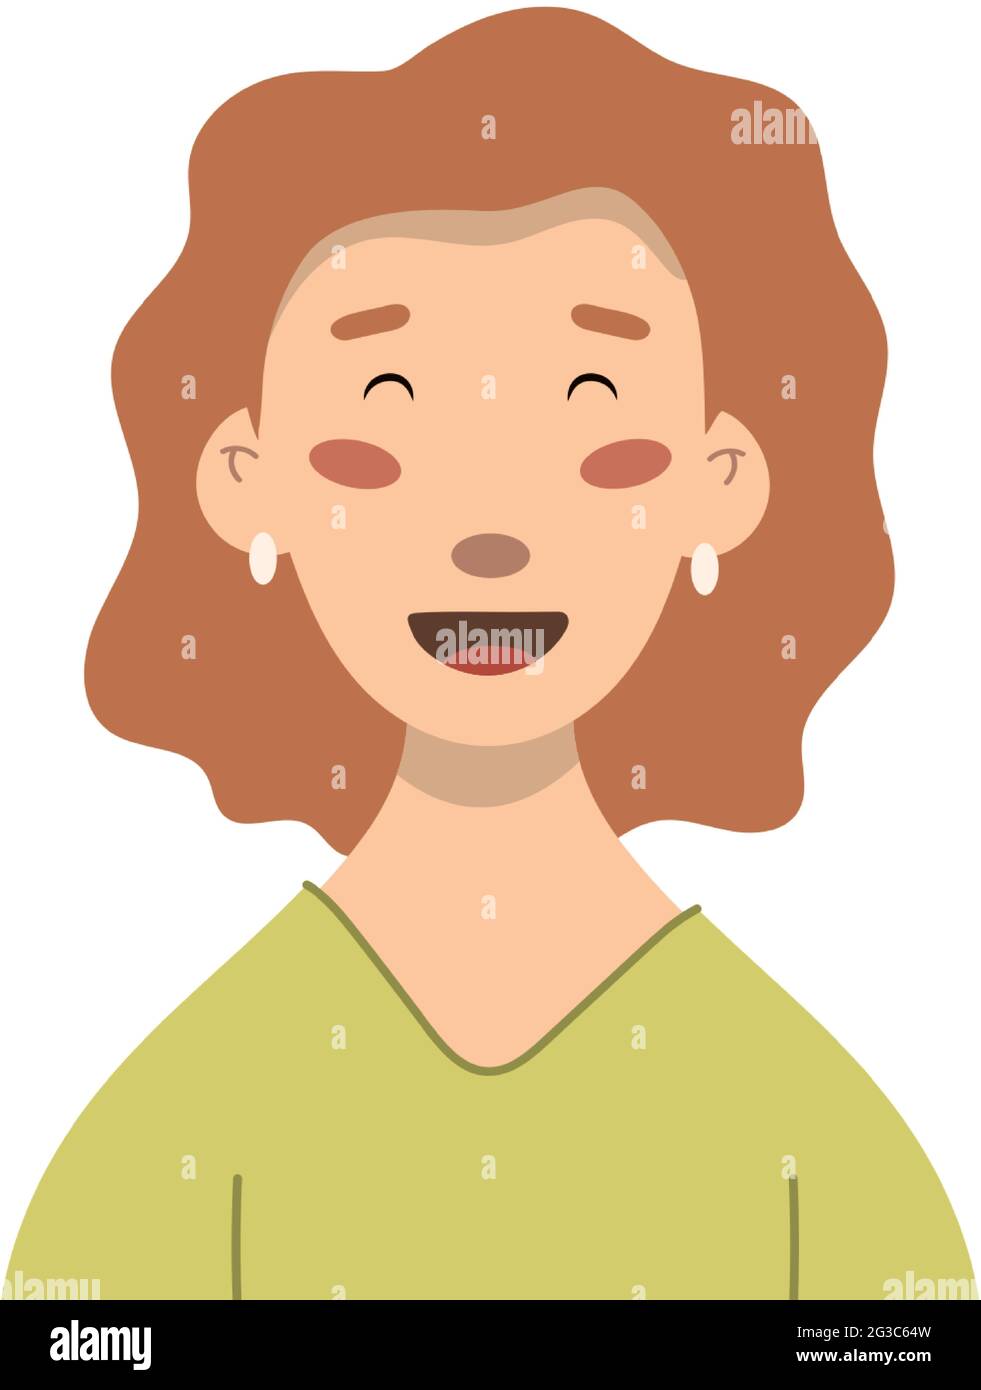 woman asian appearance smiling broadly portrait vector Stock Vector